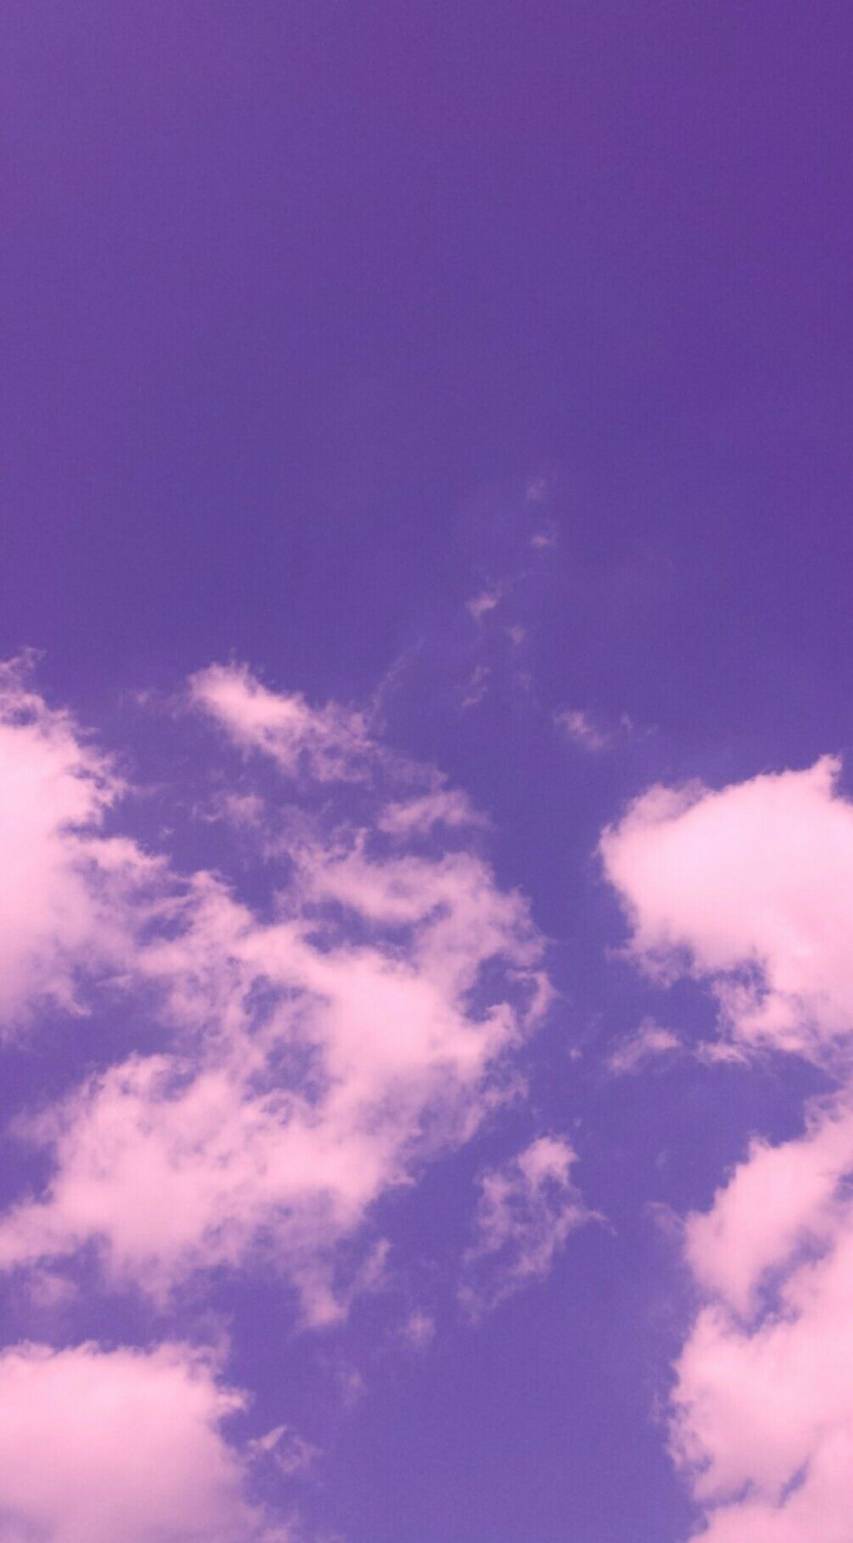 Cool Purple Aesthetic Sky Landscape Wallpaper for iPhone